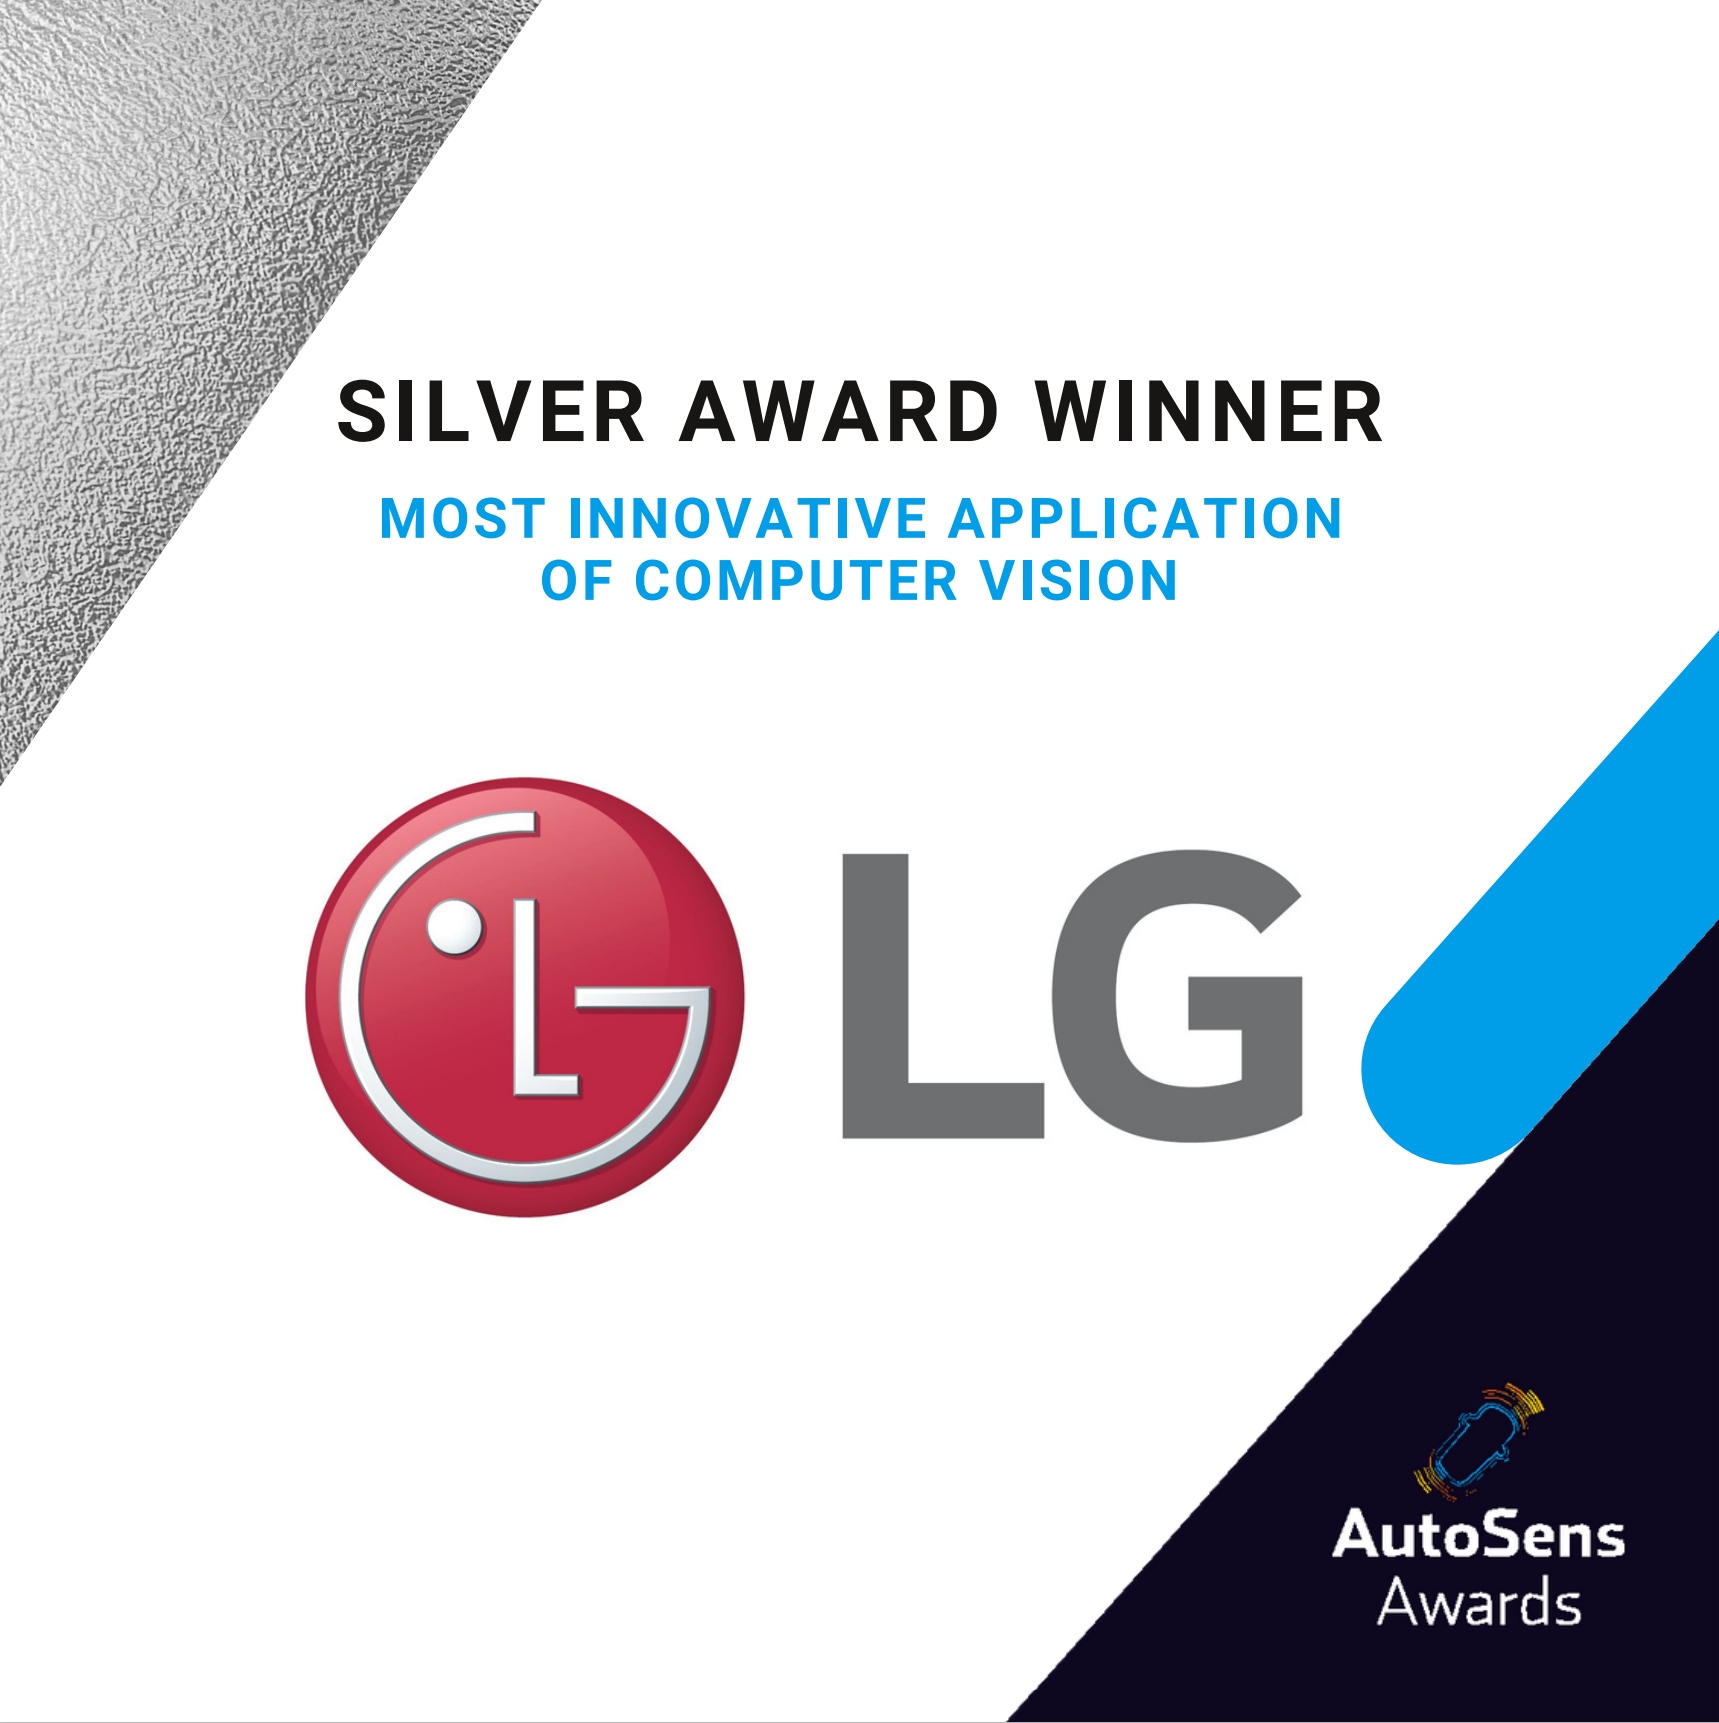 Image of Silver Award from AutoSens Awards given to LG with the phrase "Most Innovative Application of Computer Vision"